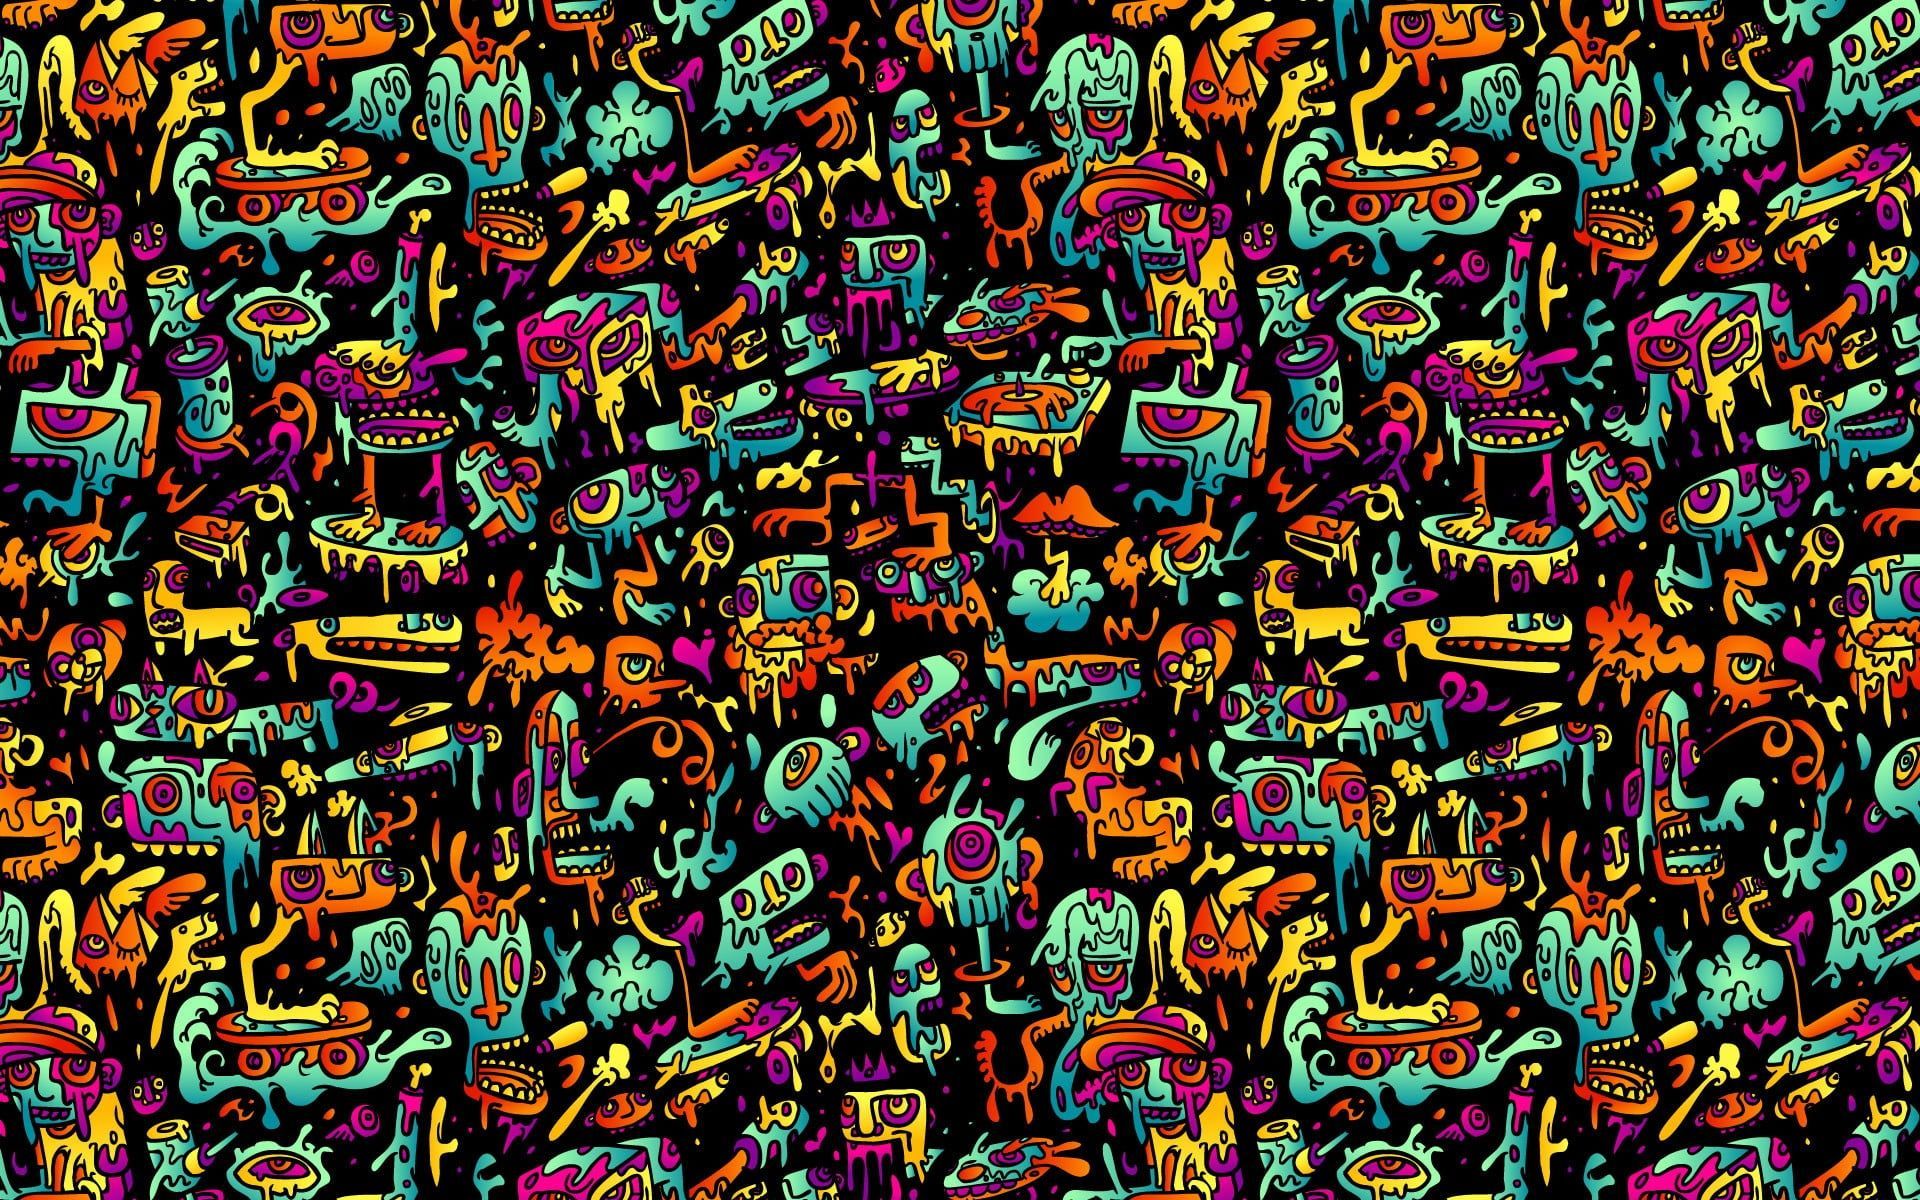 multicolored doodle wallpaper #abstract #colorful P #wallpaper #hdwallpaper #desktop. Abstract wallpaper, Desktop wallpaper art, Wallpaper doodle